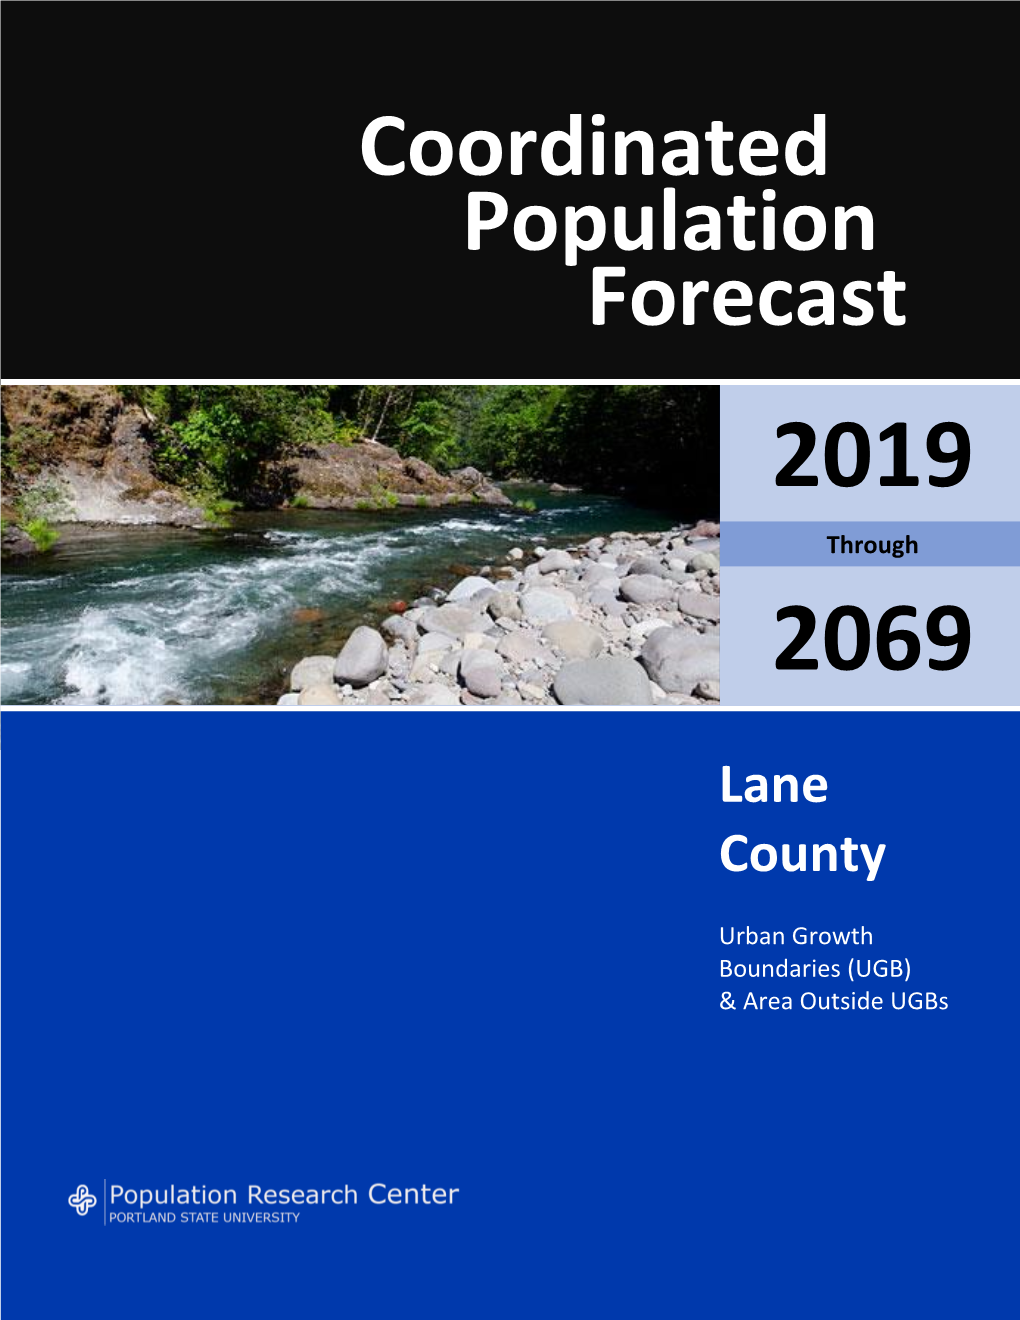 Coordinated Population Forecast for Lane County, Its Urban Growth Boundaries (UGB), and Area Outside Ugbs 2019-2069